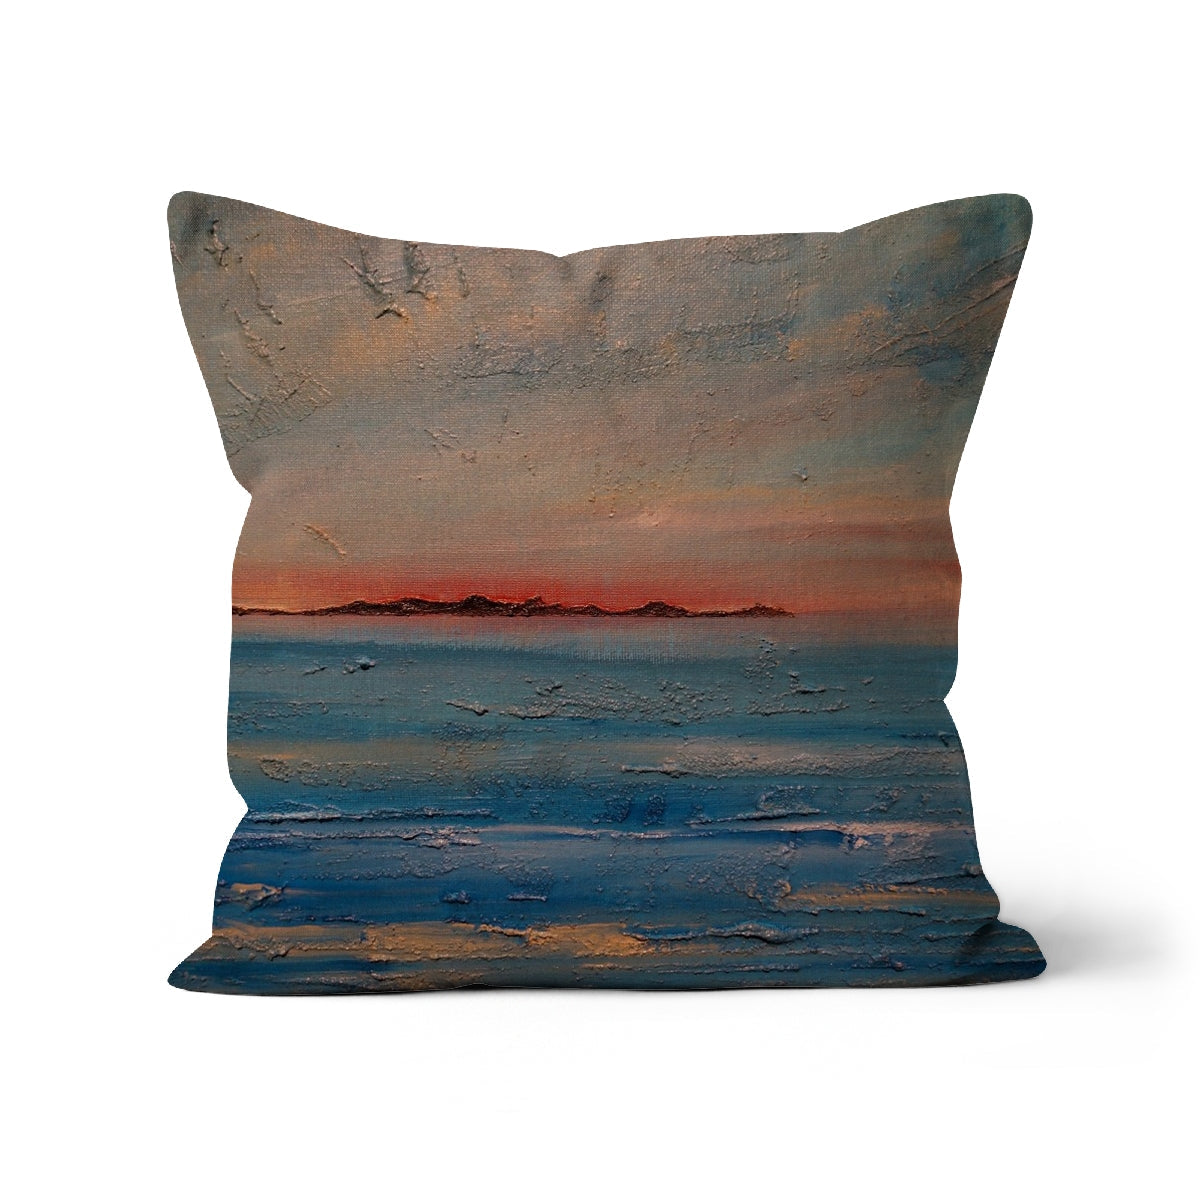 Gigha Sunset Art Gifts Cushion-Cushions-Hebridean Islands Art Gallery-Linen-12"x12"-Paintings, Prints, Homeware, Art Gifts From Scotland By Scottish Artist Kevin Hunter